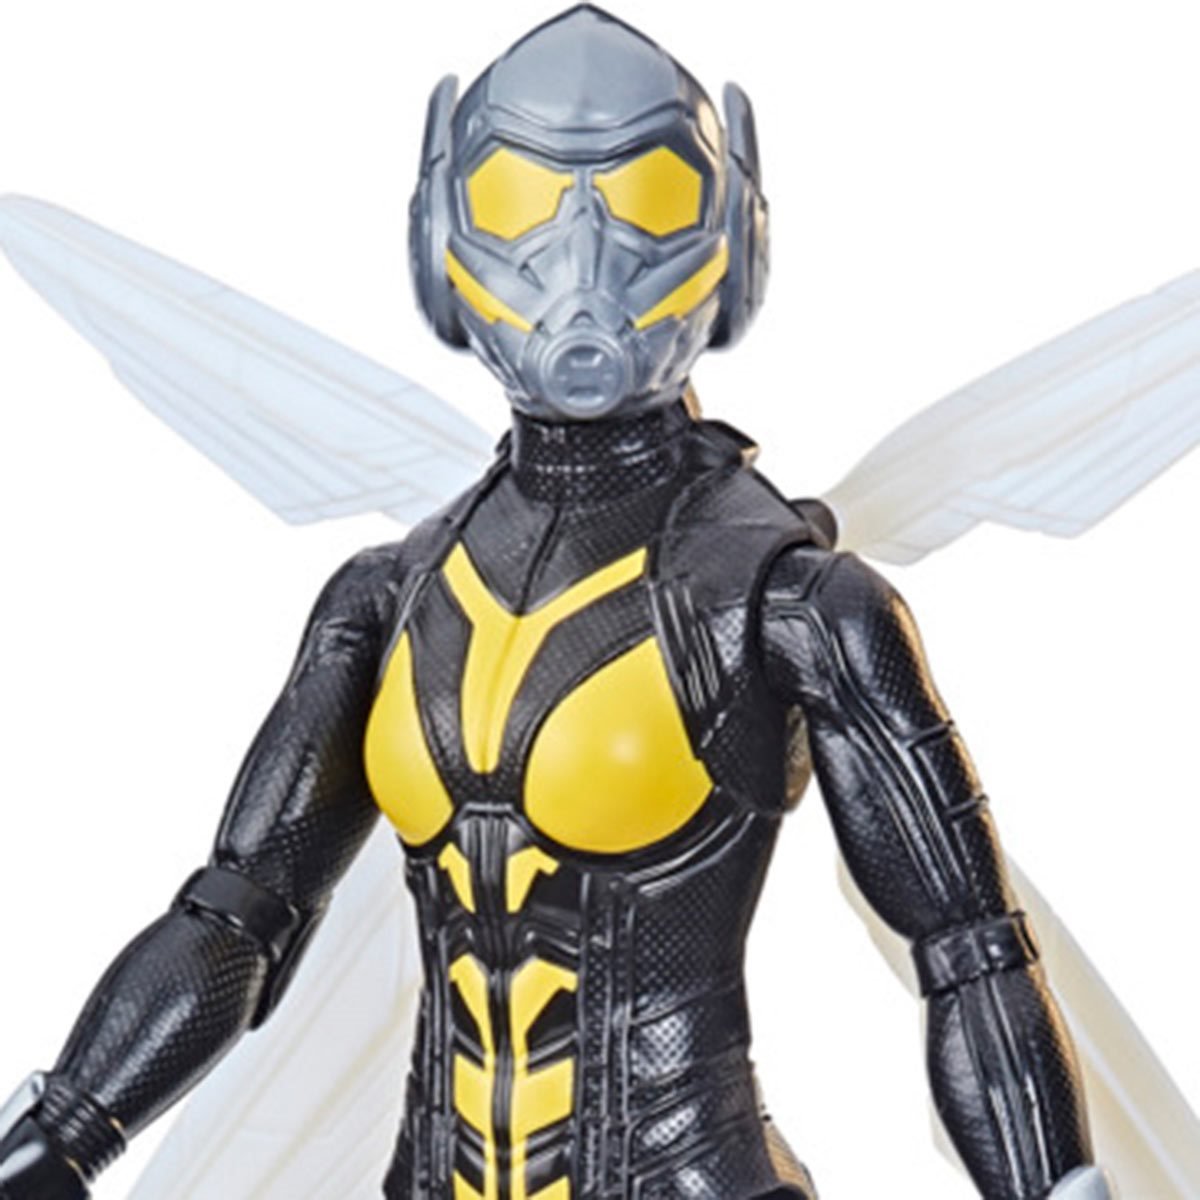 Marvel Ant-Man and the Wasp Quantumania Titan Hero Series Marvel's The Wasp  Action Figure - Marvel